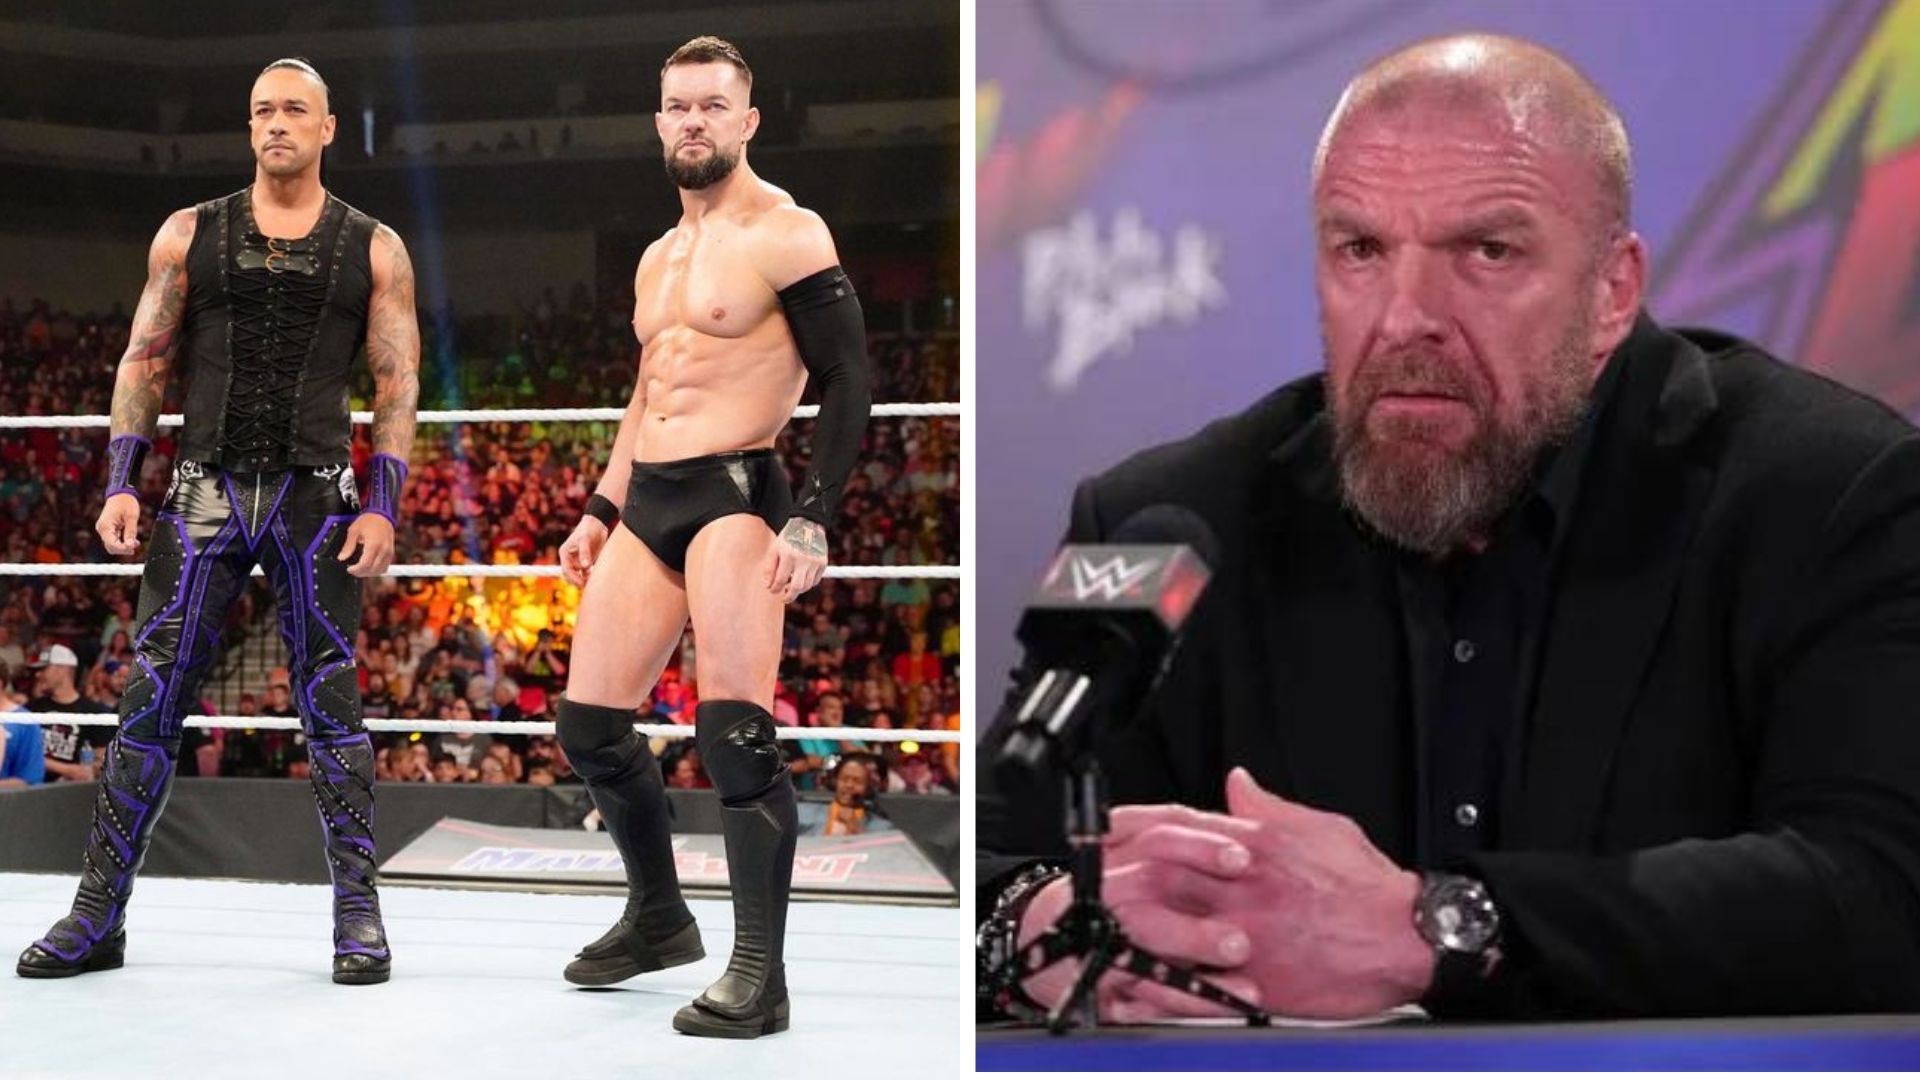 Damian Priest and Finn Balor could meet their new challengers next week